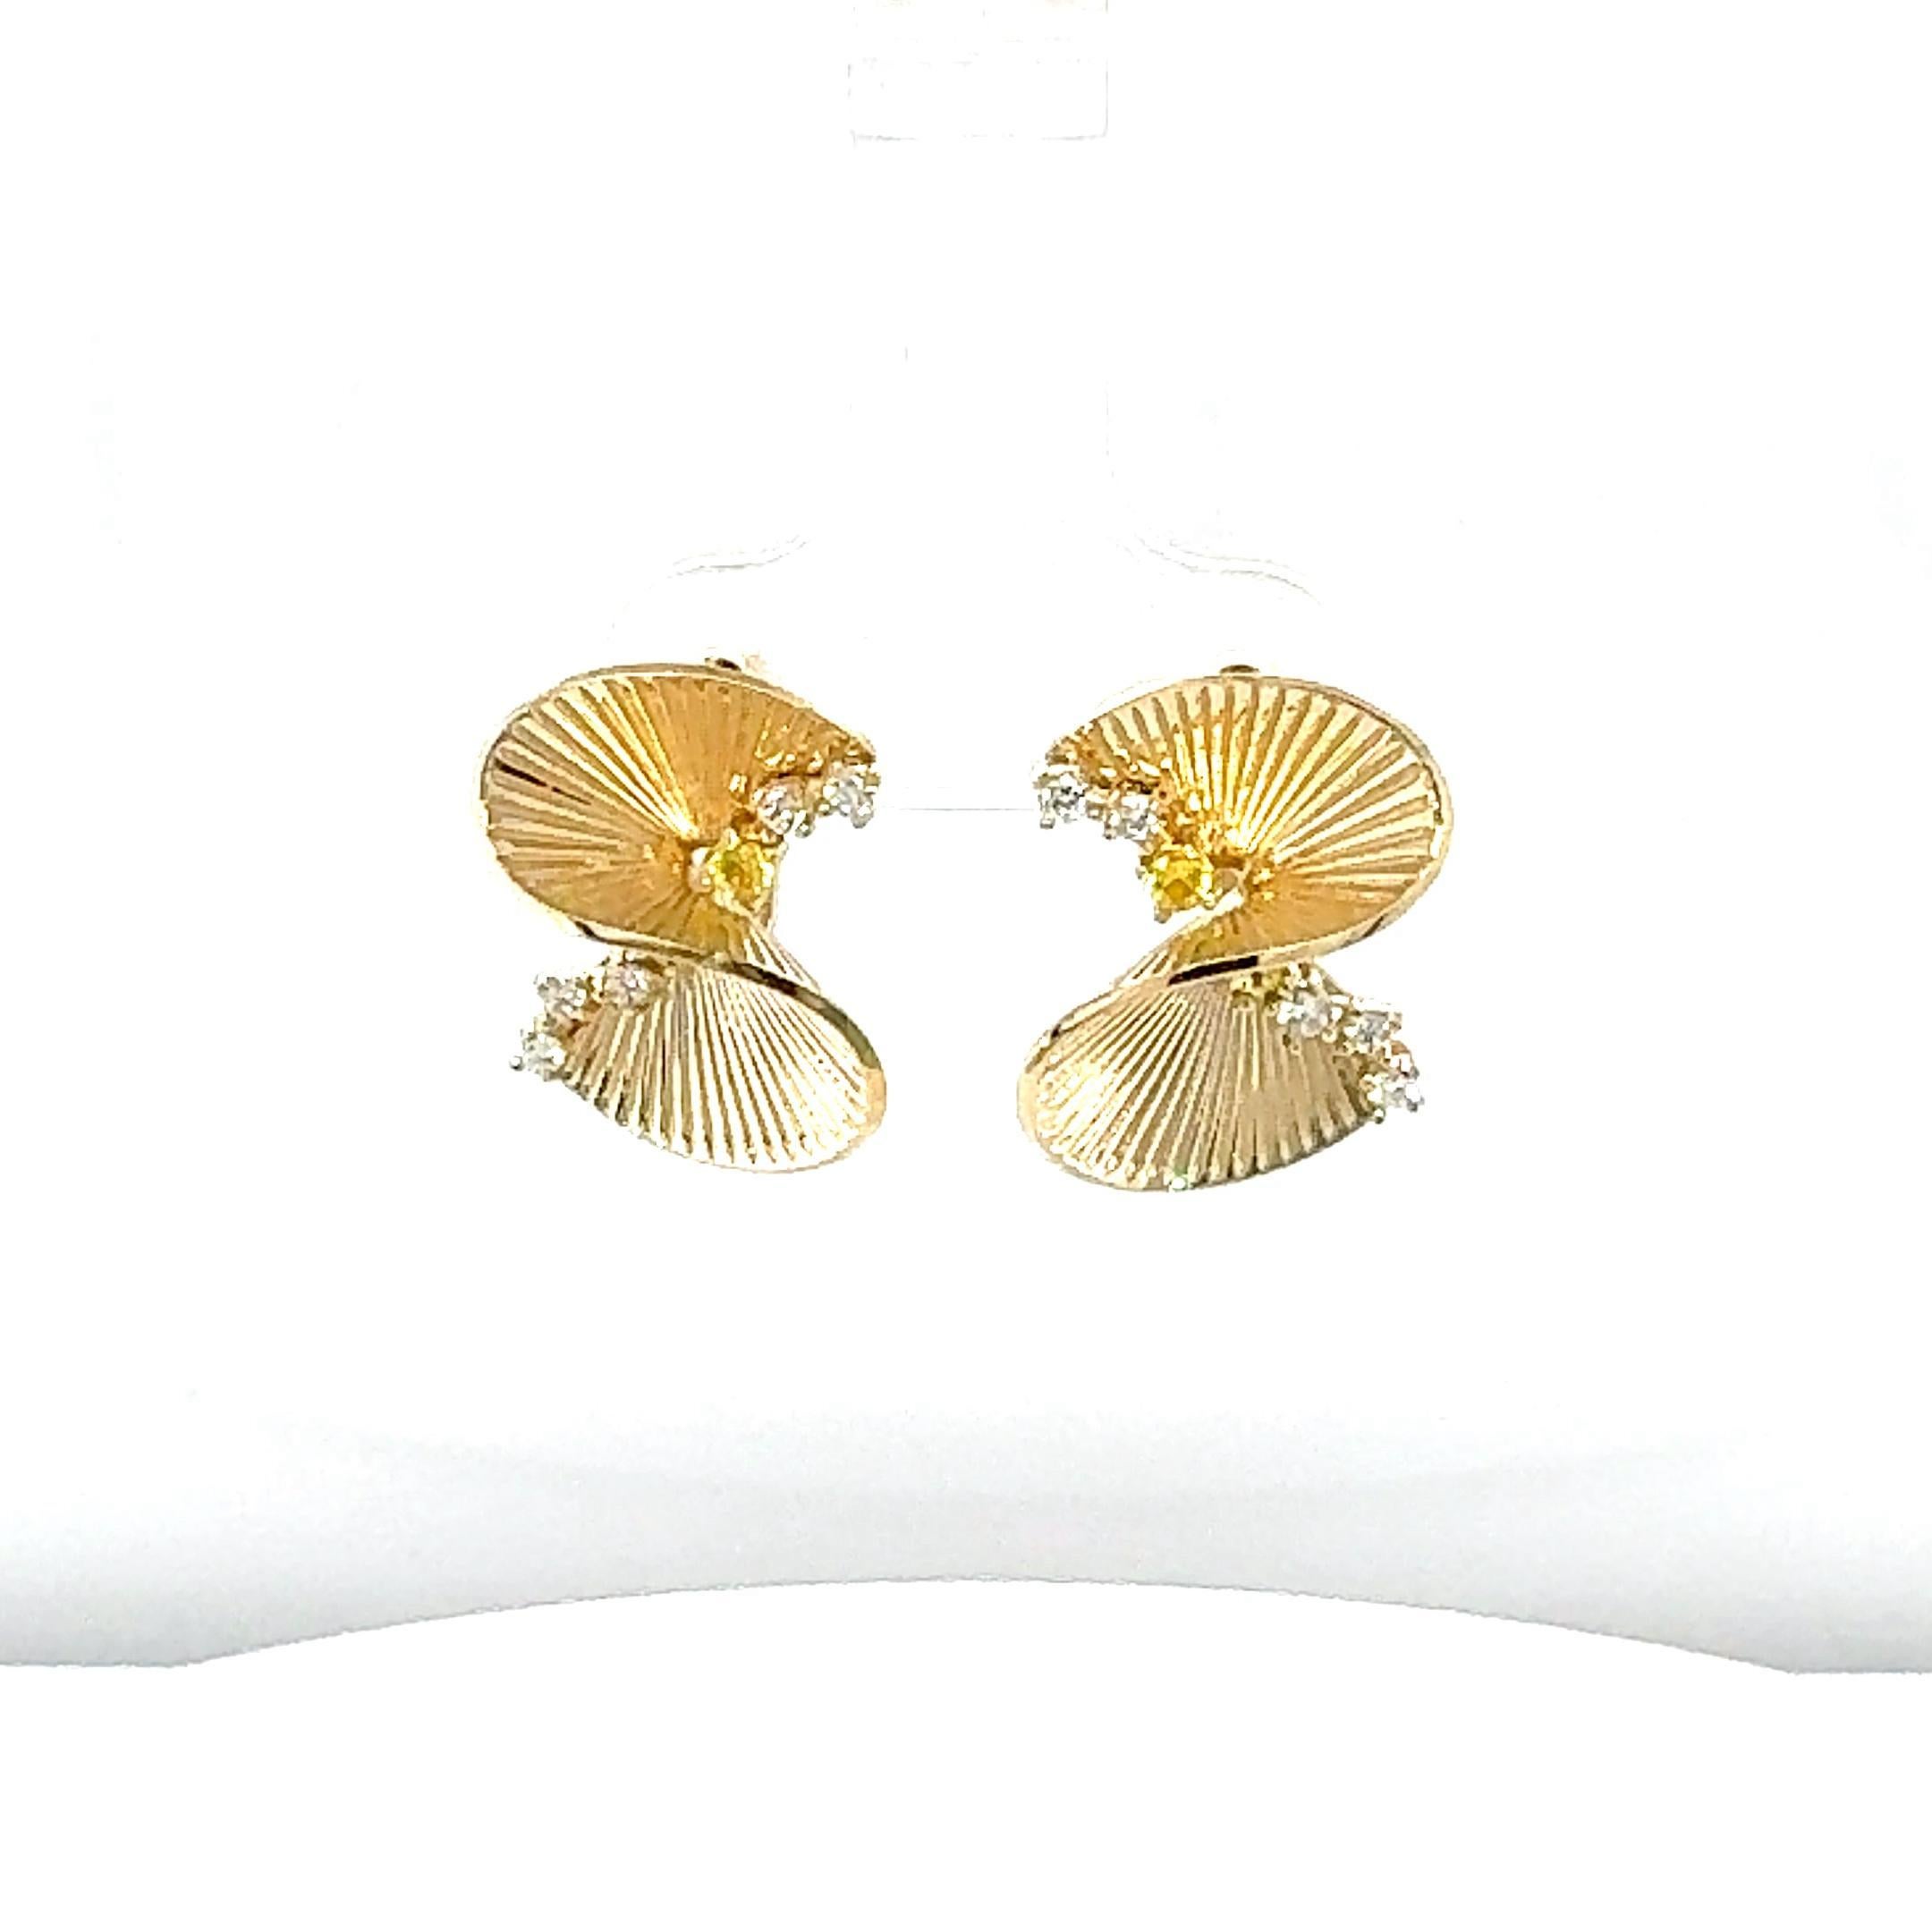 Contemporary 0.34 Carat Diamond Yellow Gold Art Deco Inspired Earrings For Sale